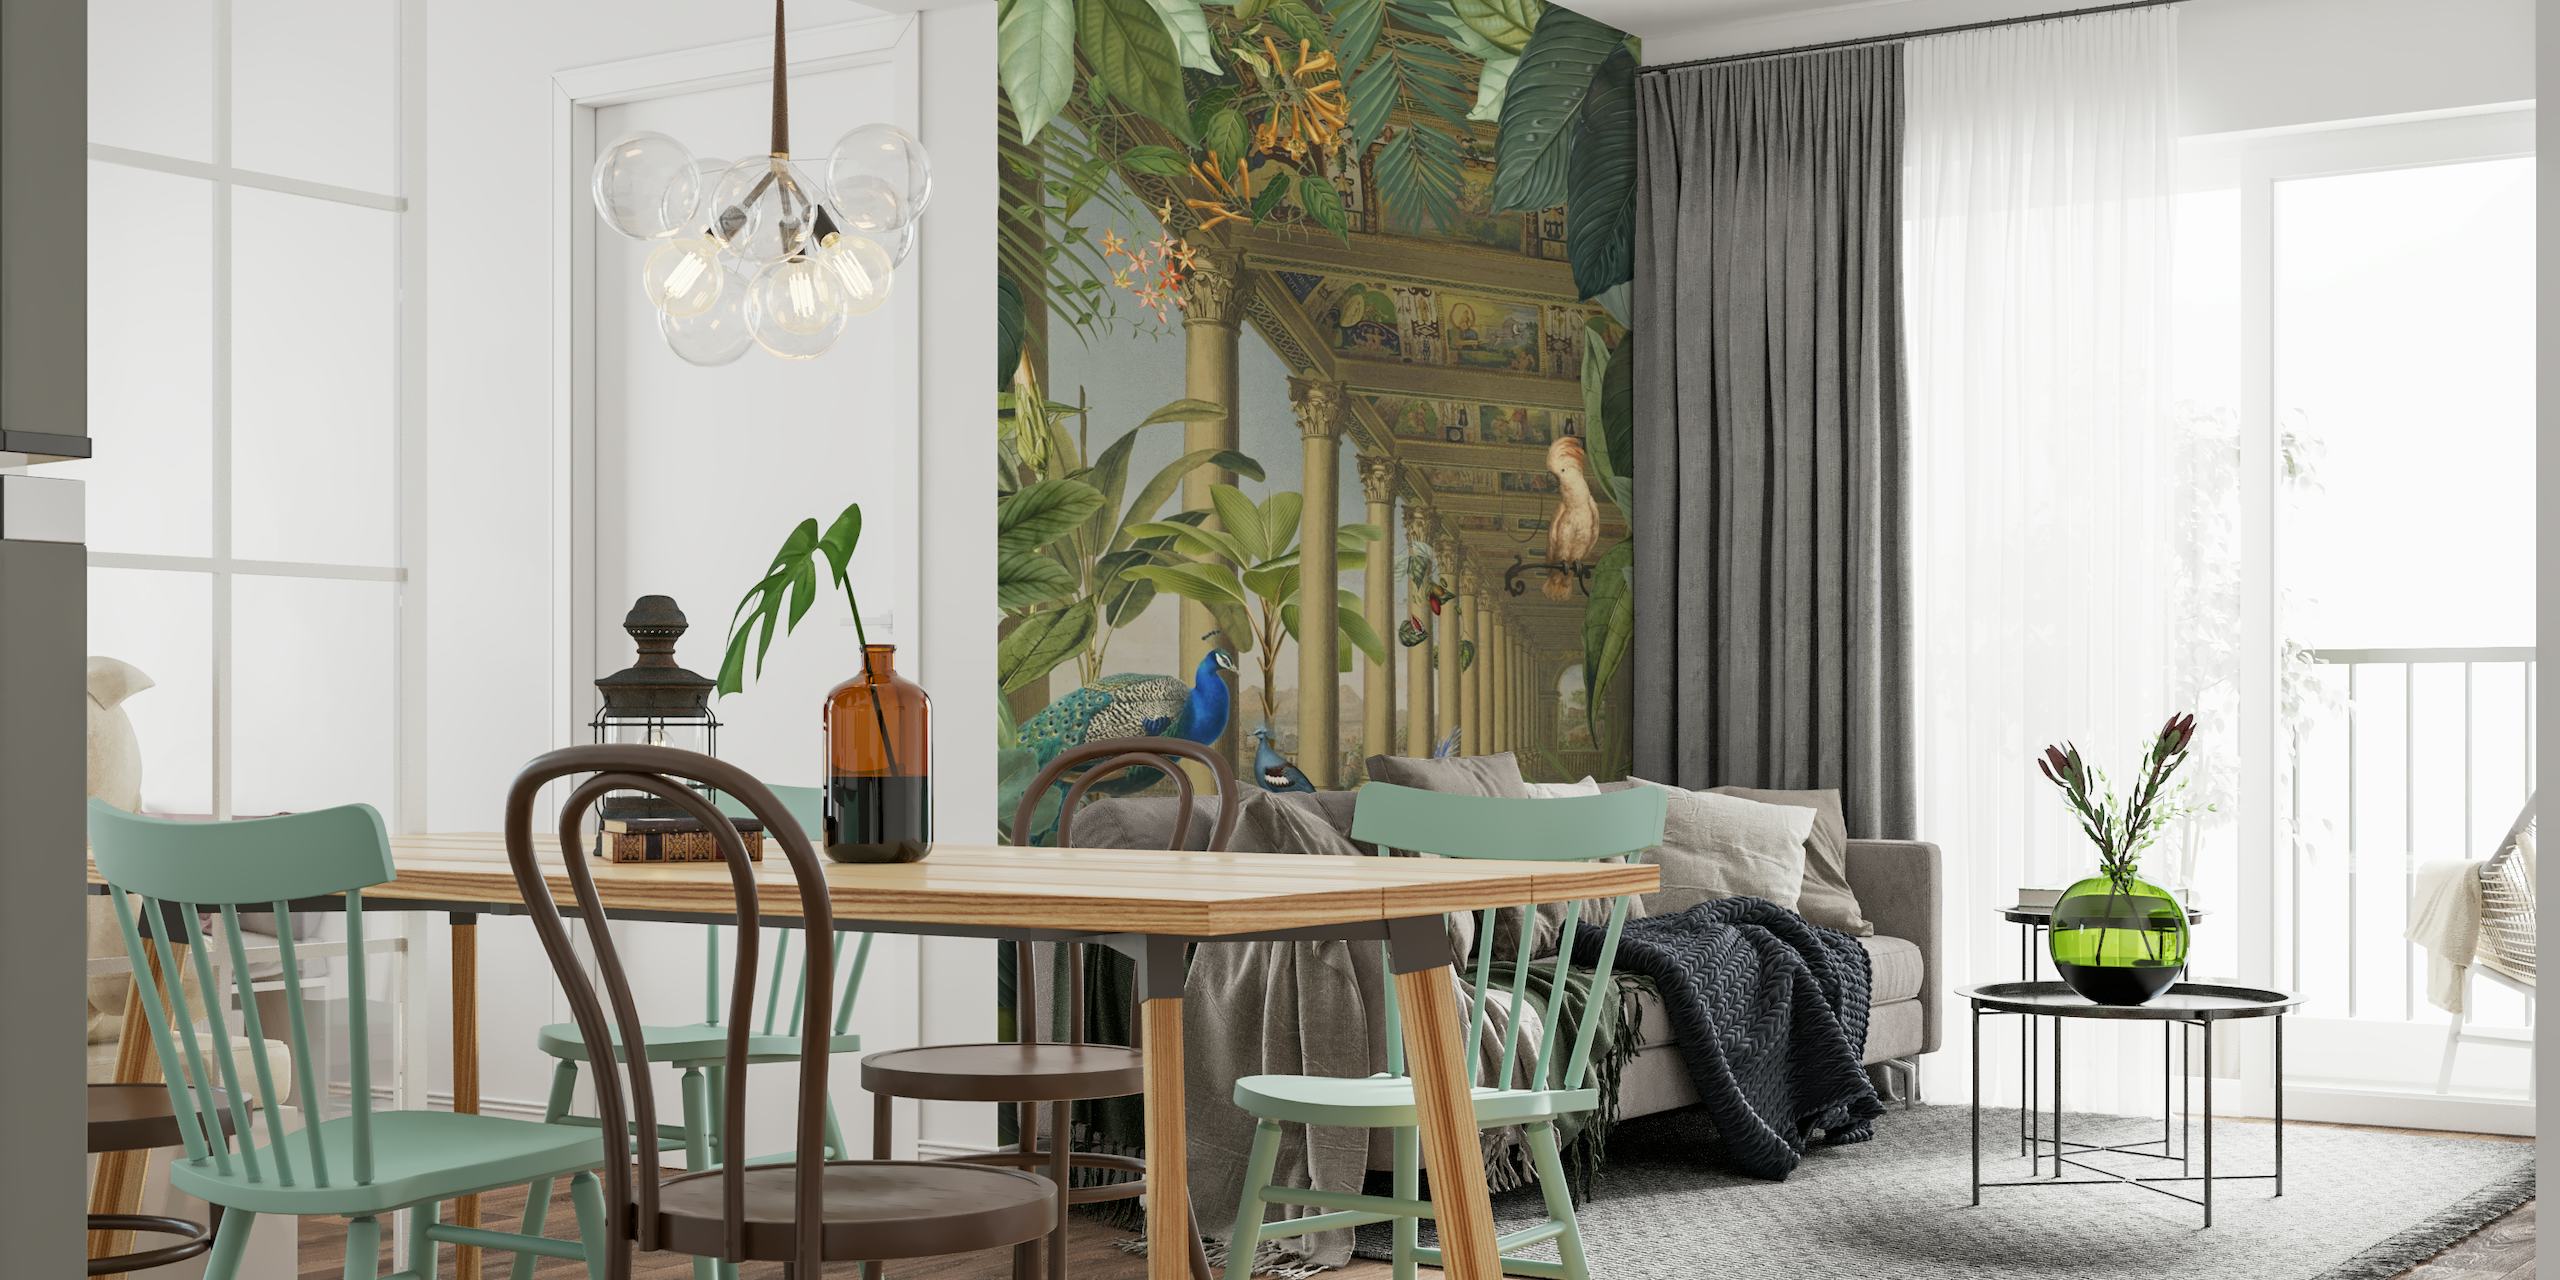 Exotic jungle and peacock-themed wall mural with antique architecture